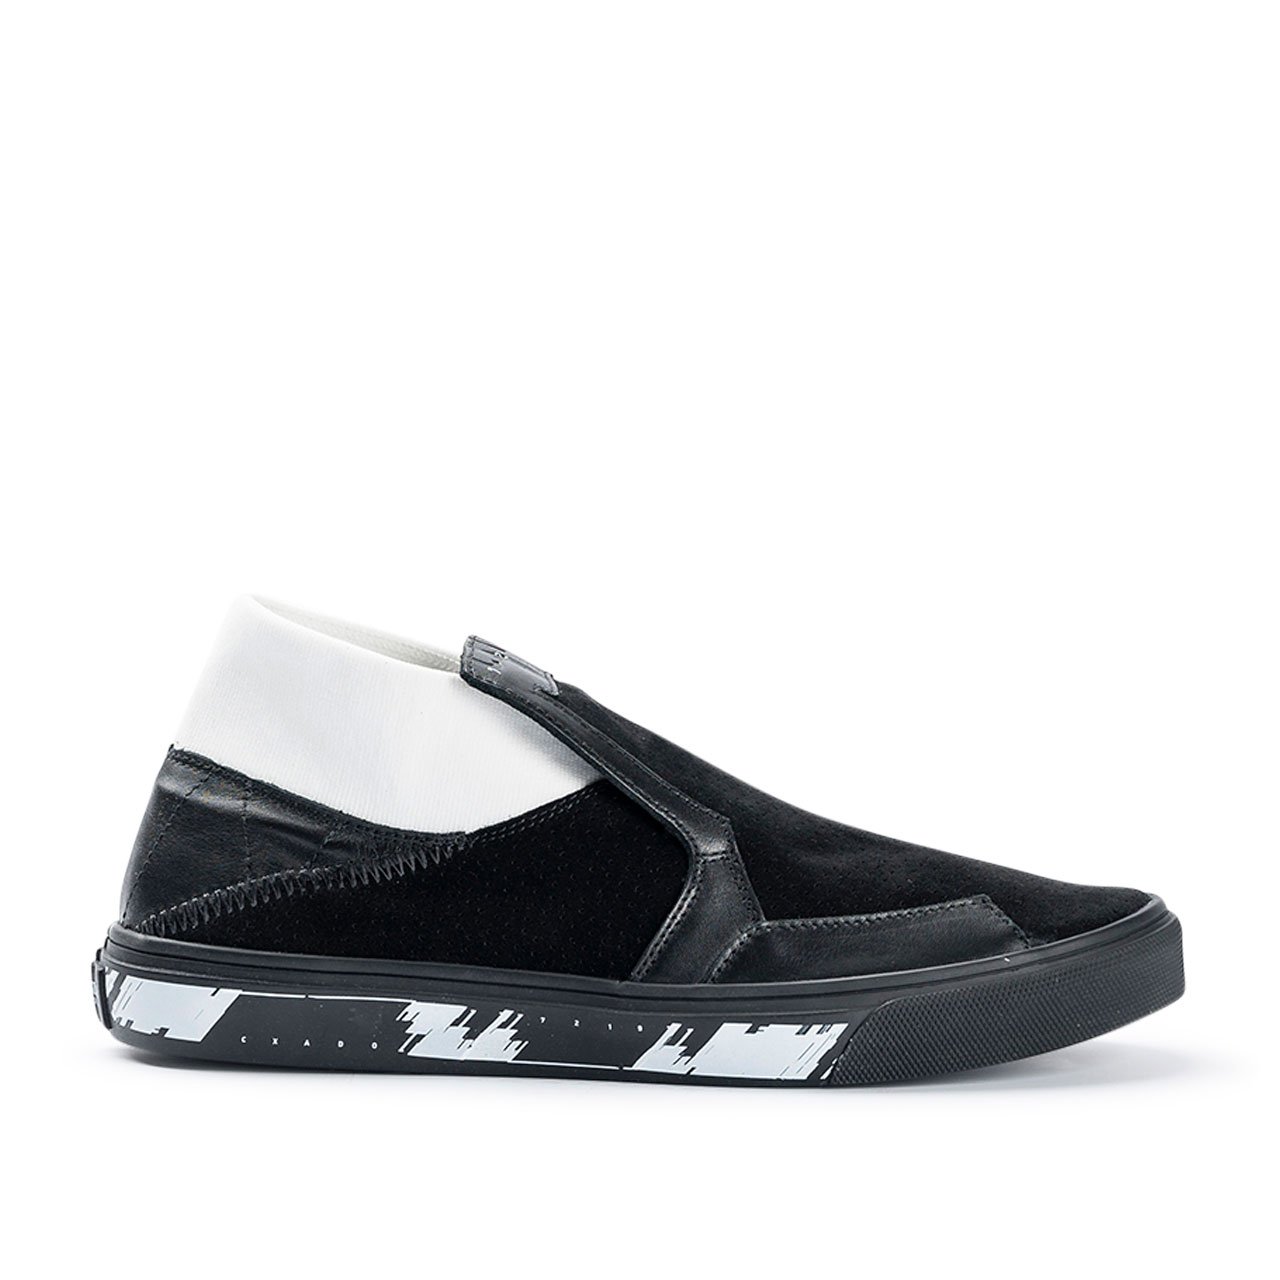 stone island shadow project slip-on mid leather (black) - 7219s0123.v0029 - a.plus - Image - 1